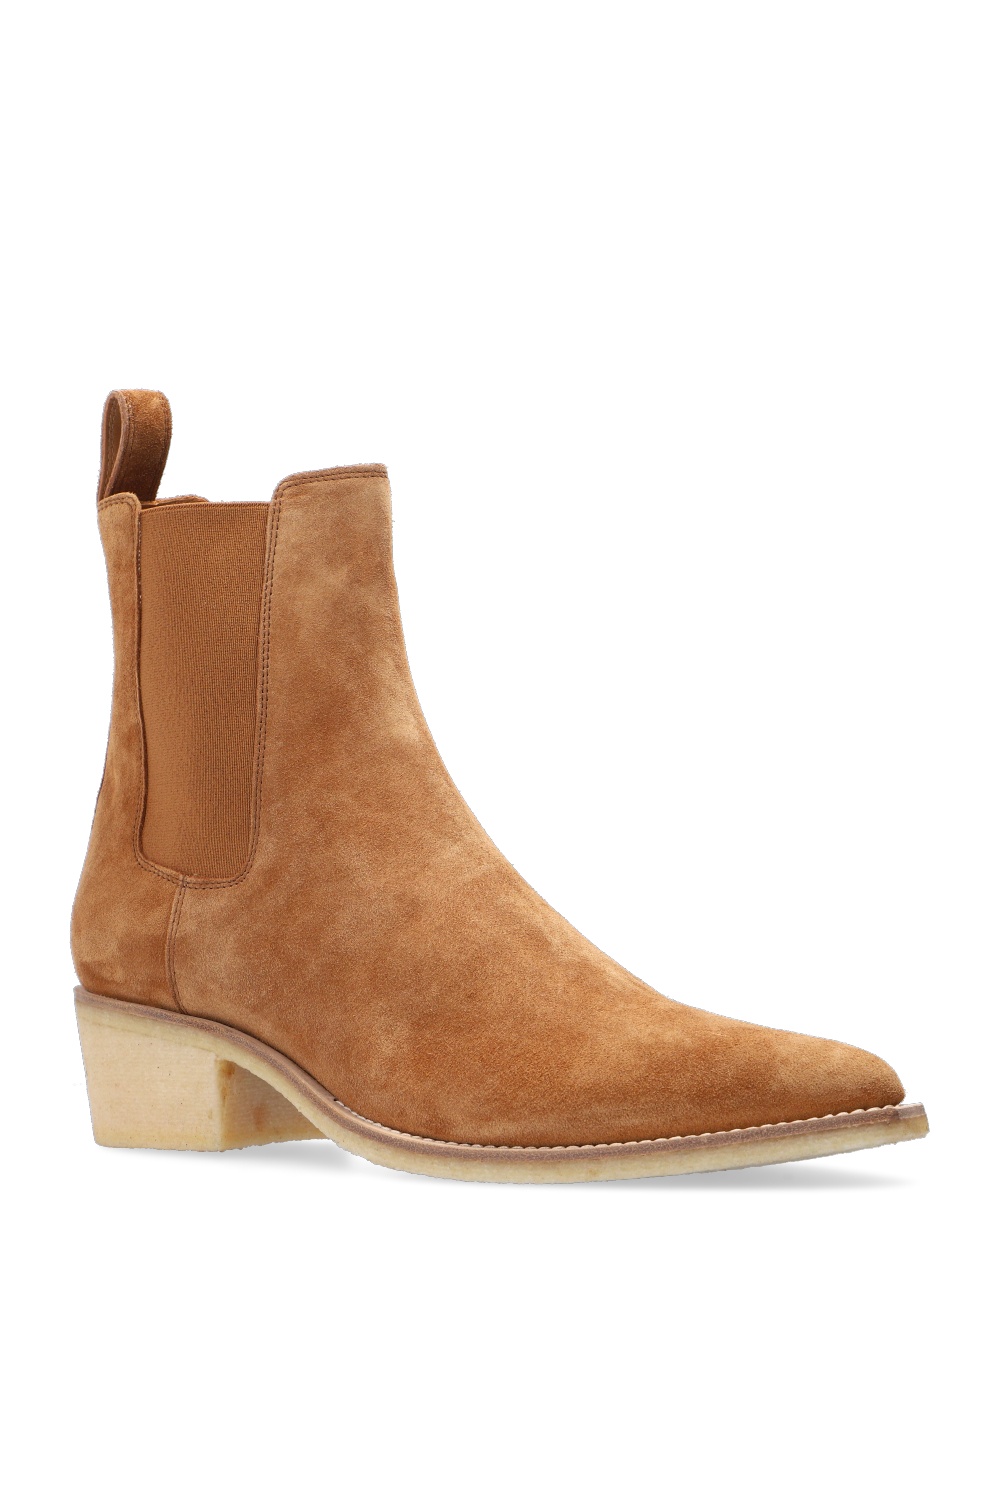 Tabbita suede boot - High Top Boots at R.M.Williams® United States